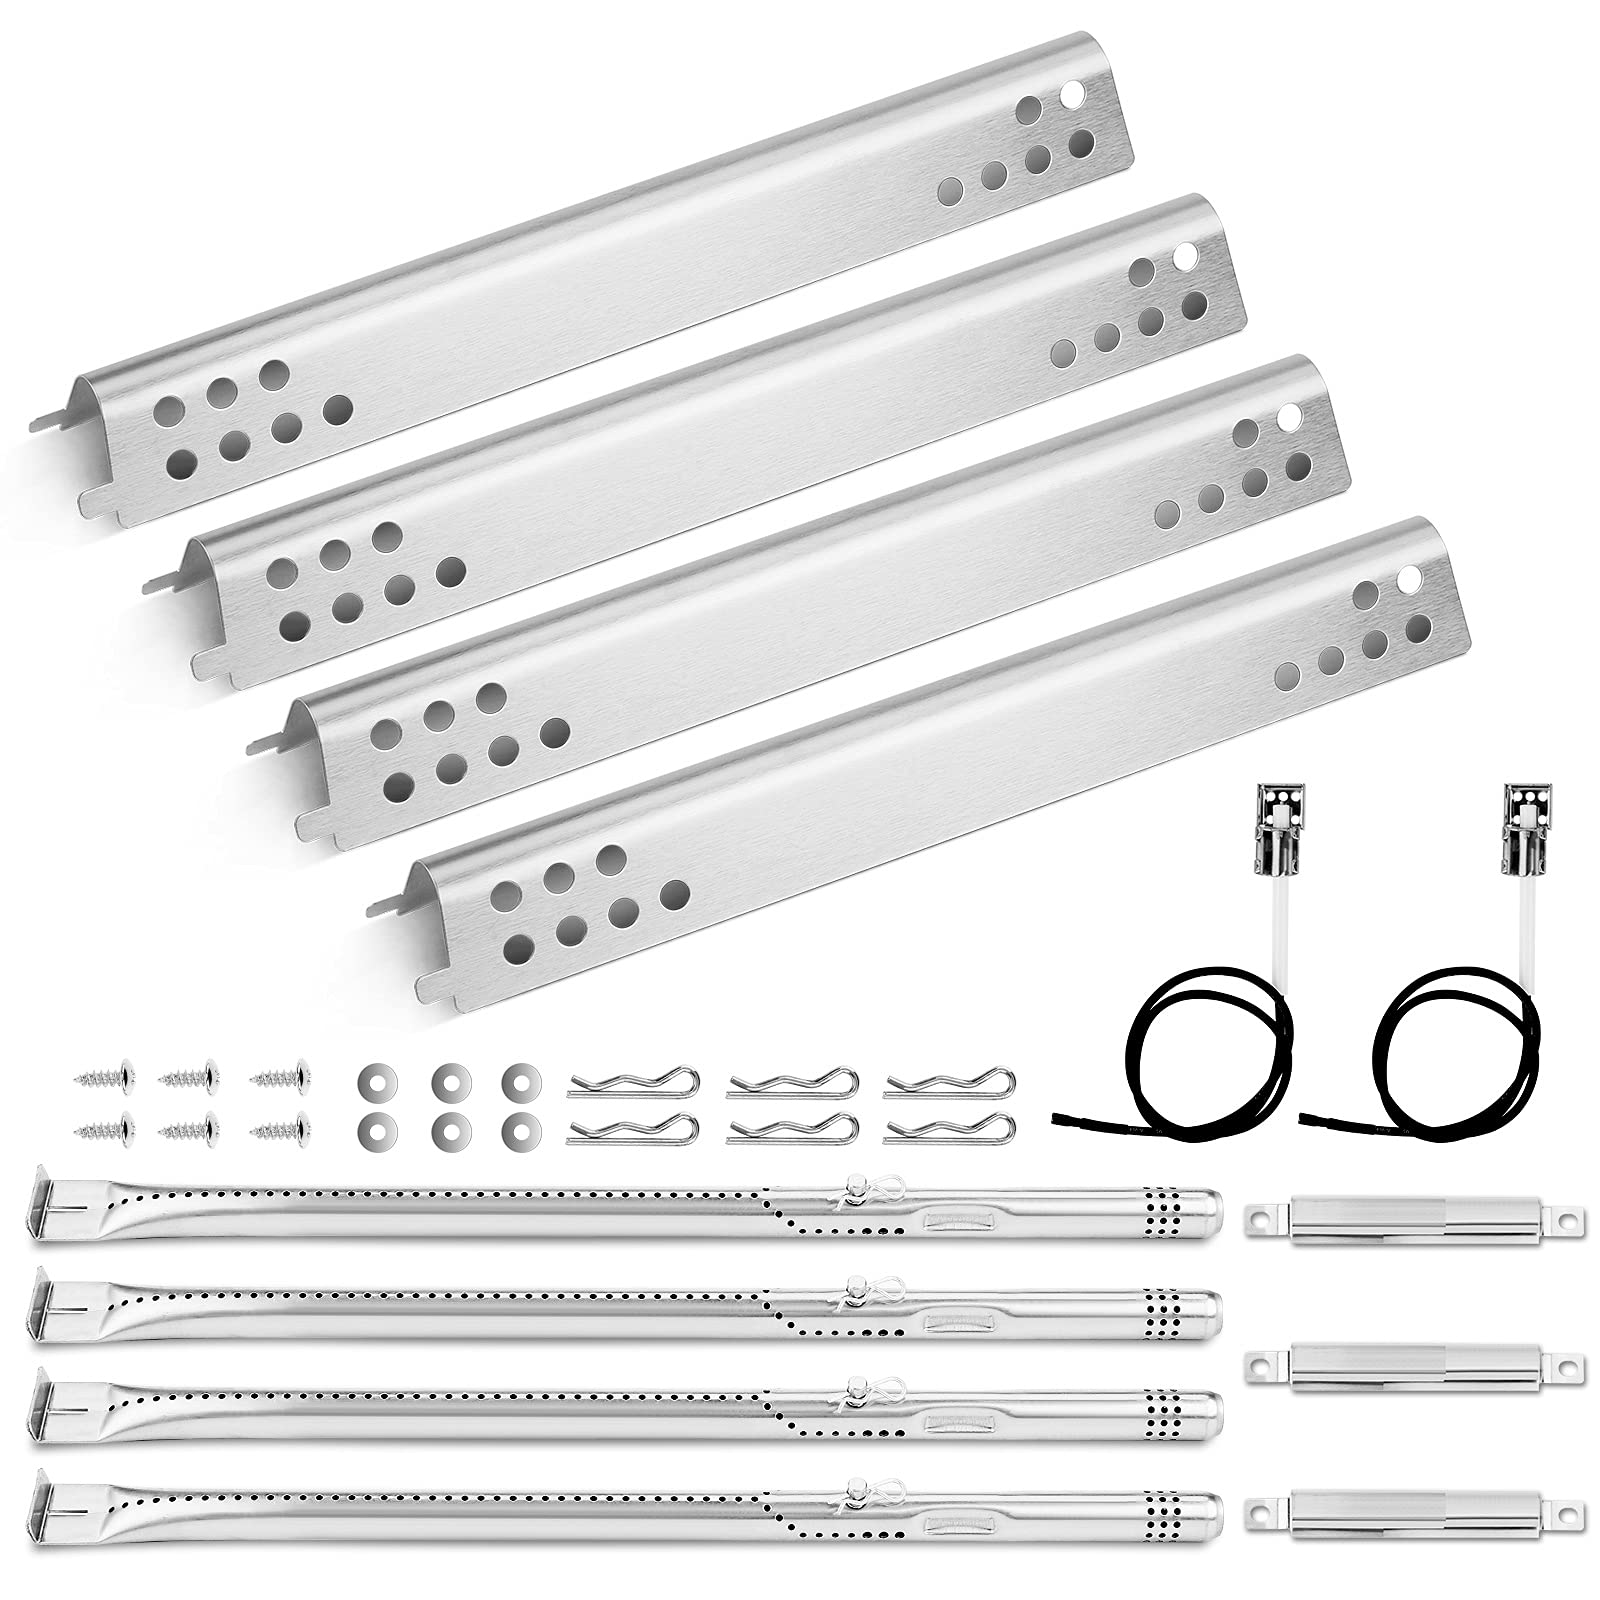 Uniflasy Grill Replacement Parts Kits for Charbroil Advantage Series 4 Burner 463344116 466344116 G4328M00W G3610003W1 Gas Grill